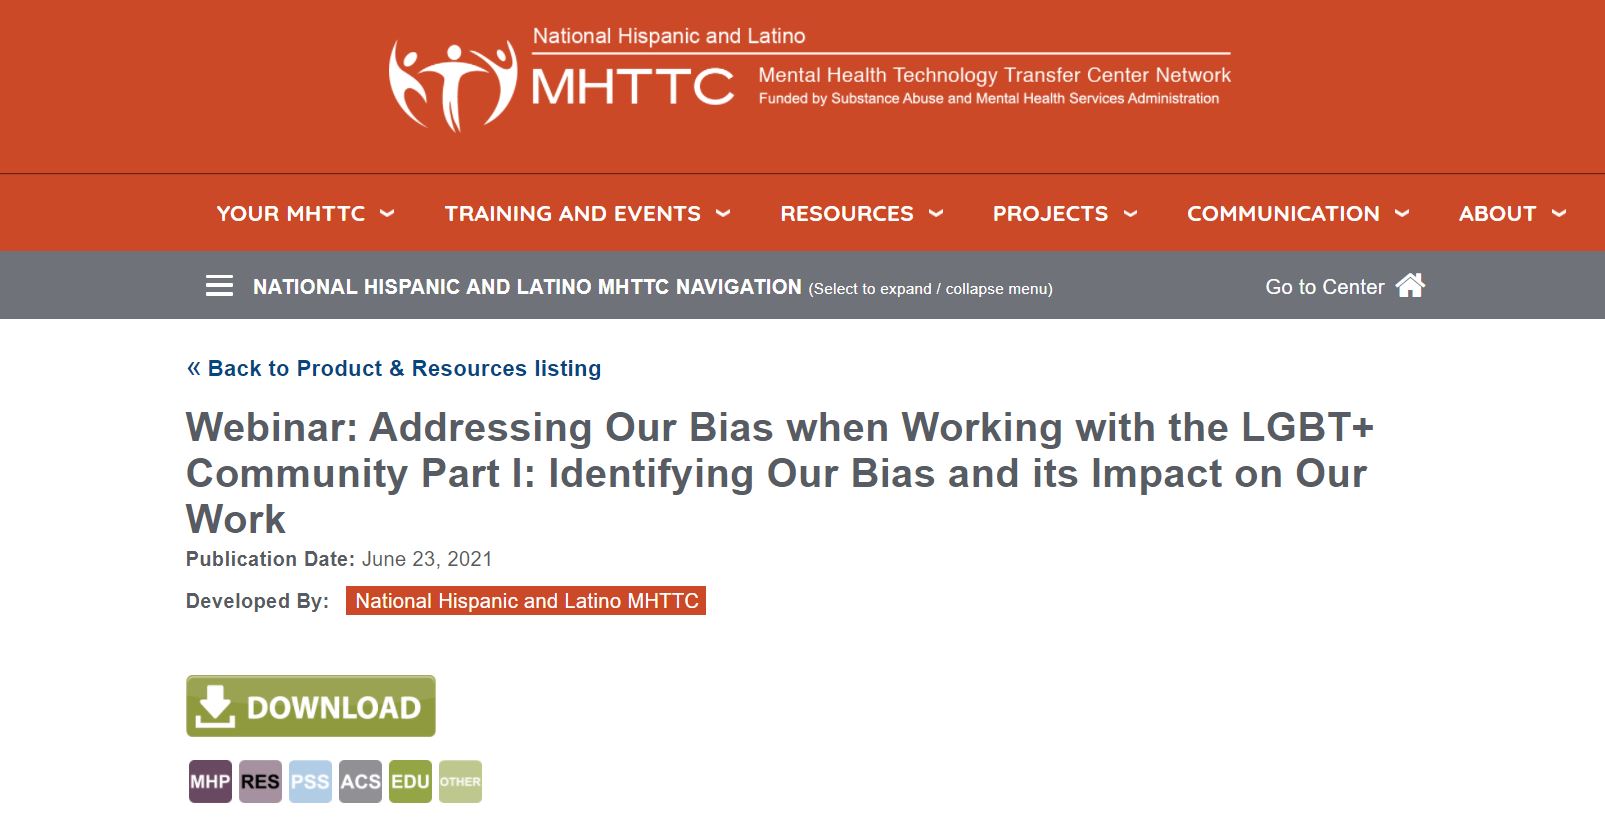 Part I: Identifying Our Bias and its Impact on Our Work